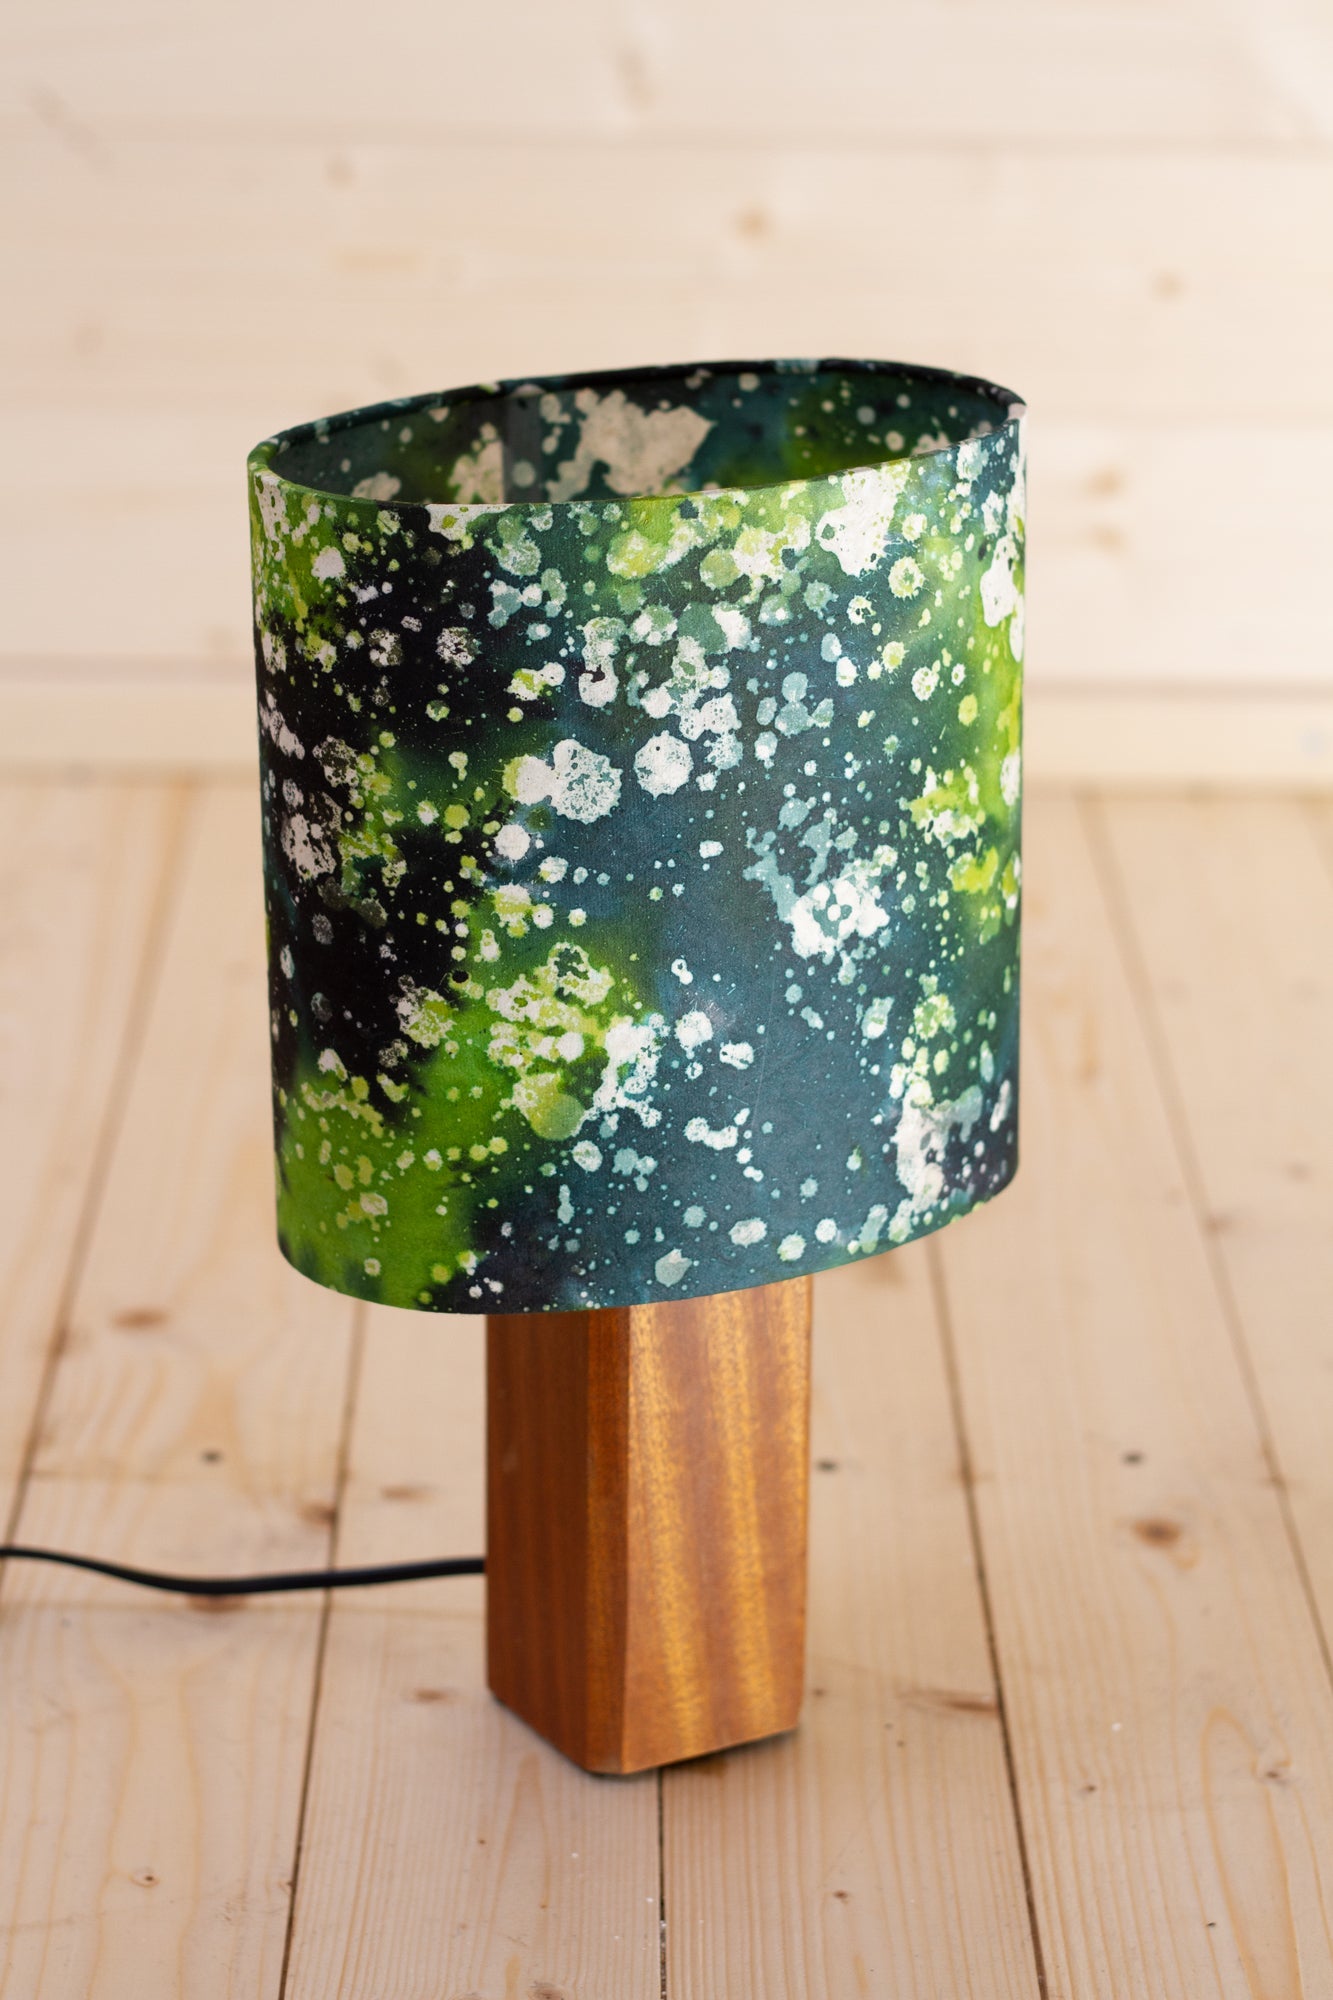 Square Sapele Table Lamp with 20cm Oval Lamp Shade B114 ~ Batik Canopy Greens